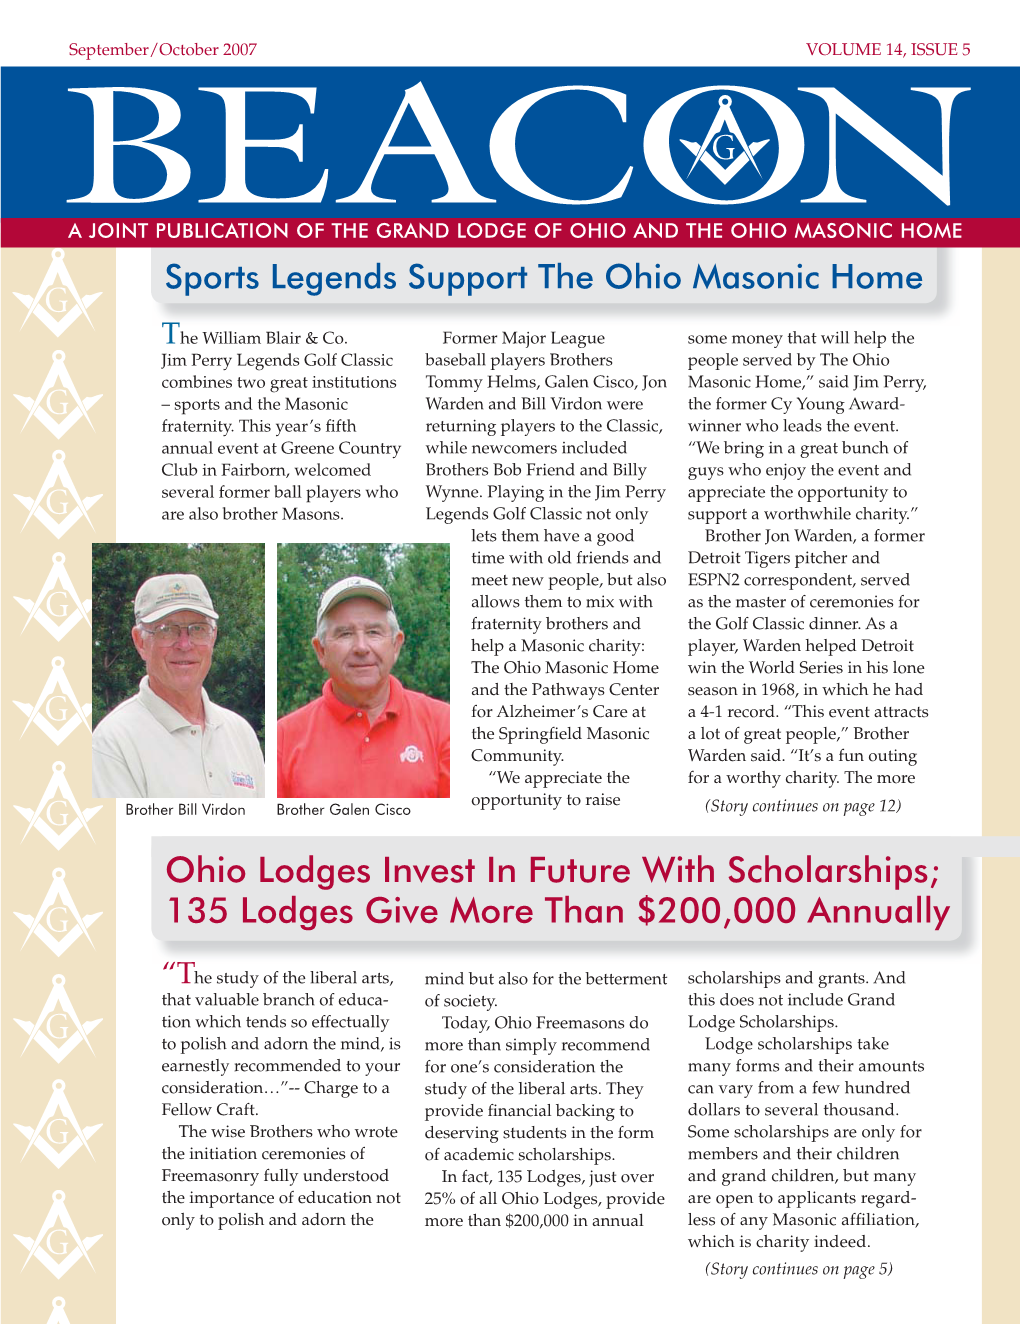 Ohio Lodges Invest in Future with Scholarships; 135 Lodges Give More Than $200,000 Annually